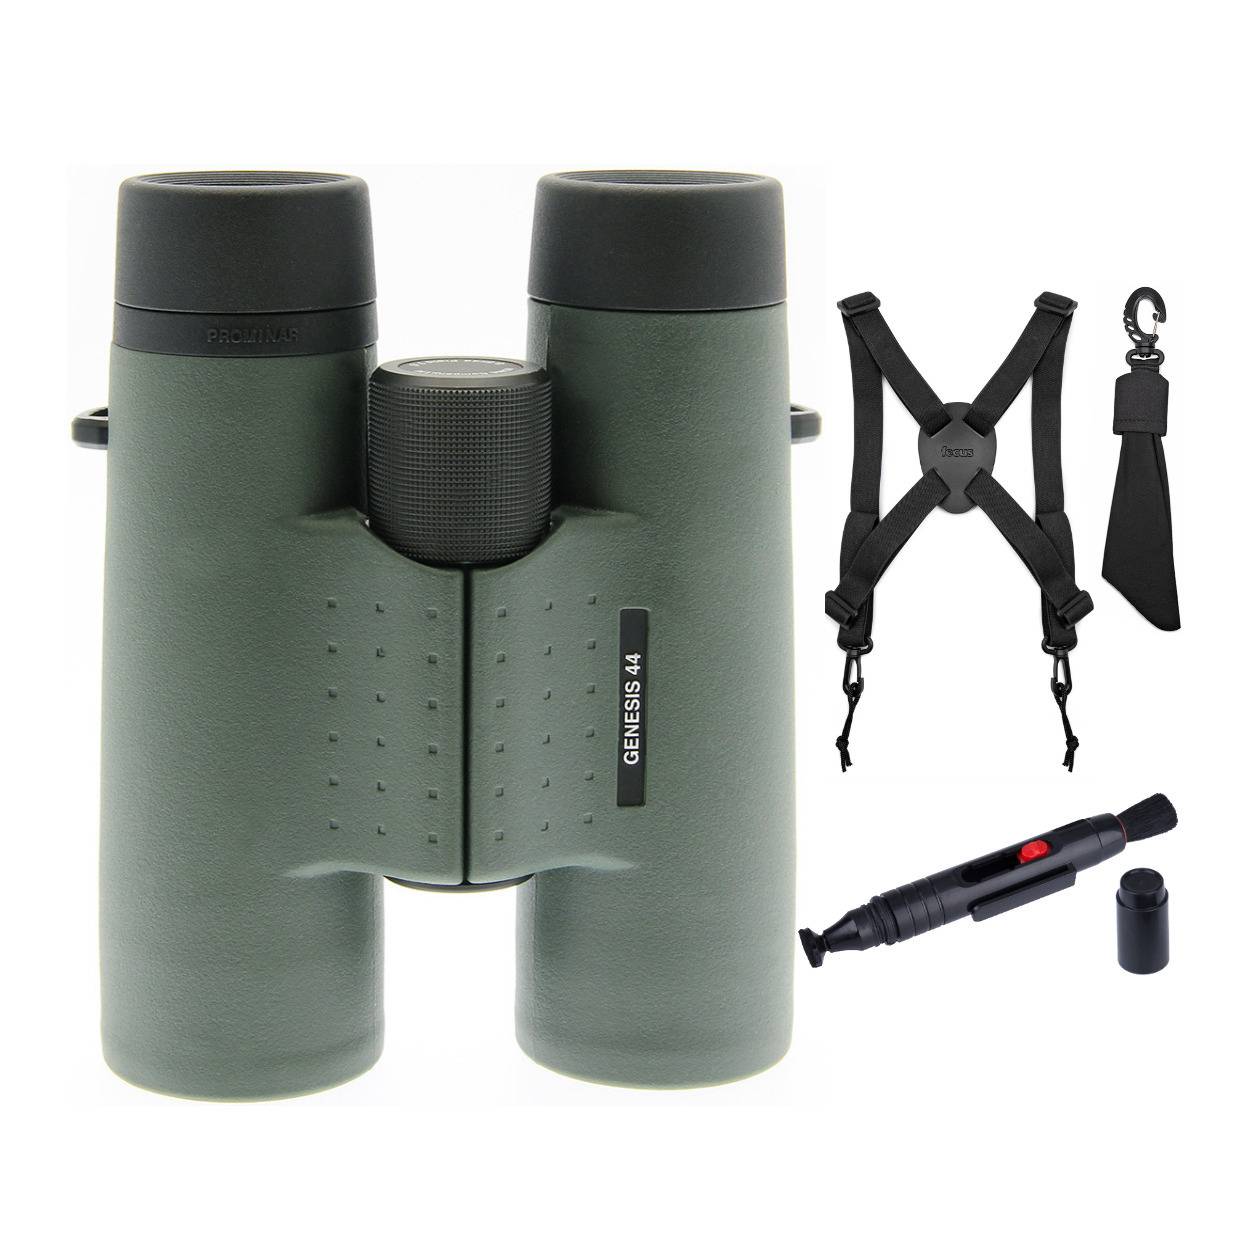 Kowa 10.5x44 Prominar XD Lens Roof Prism Binoculars with Harness and Lens Pen